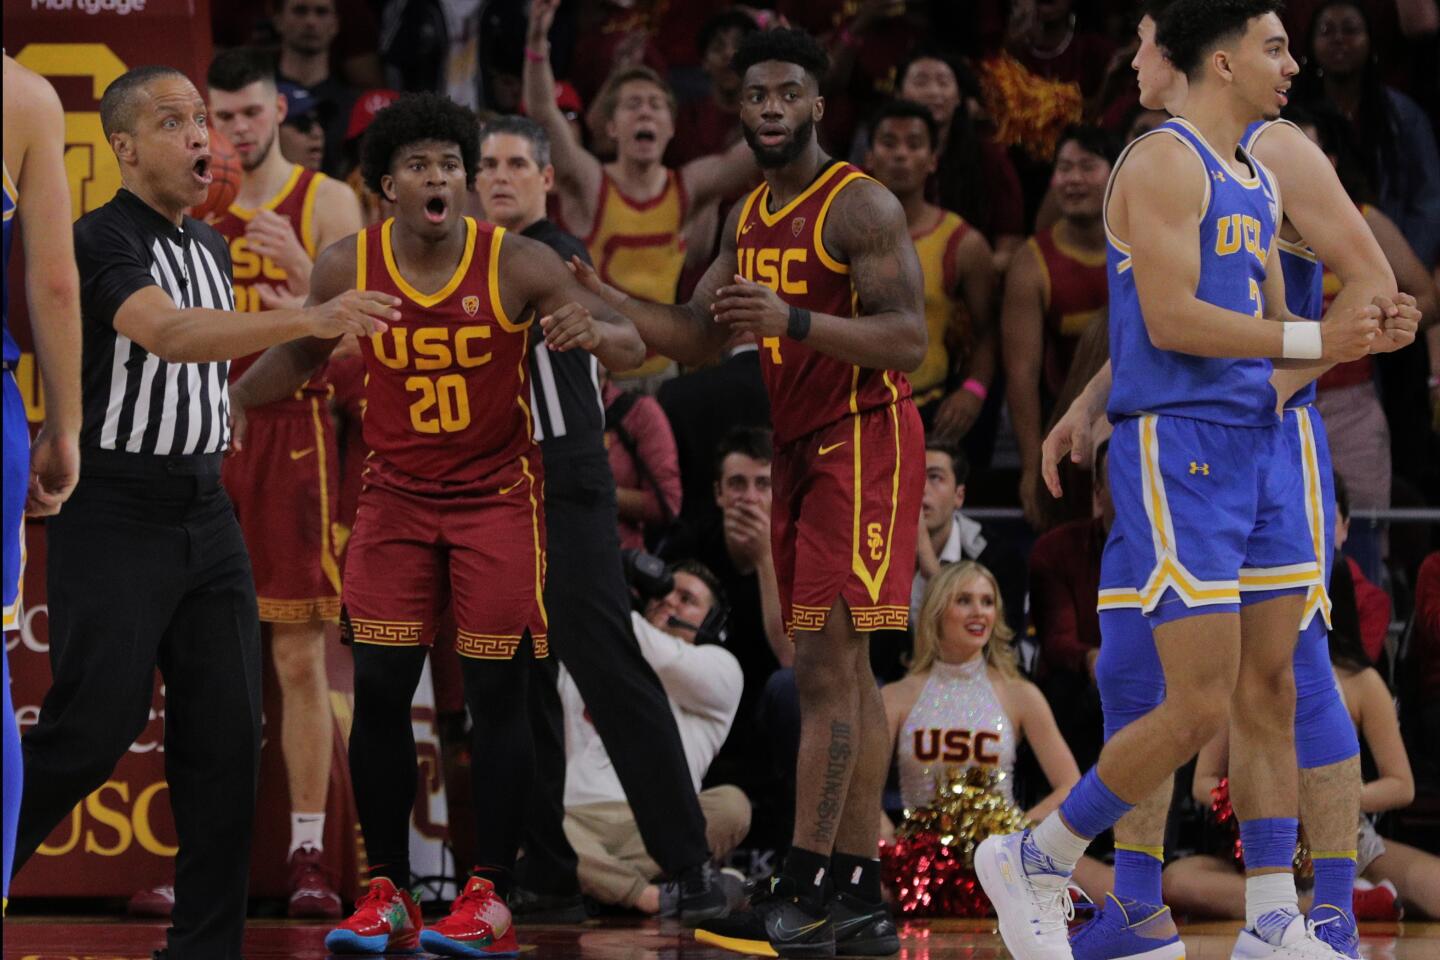 USC guard Ethan Anderson (20) reacts after being called for a foul with less than 10 seconds left in the Trojans' 54-52 victory over UCLA at Galen Center on March 7, 2020.